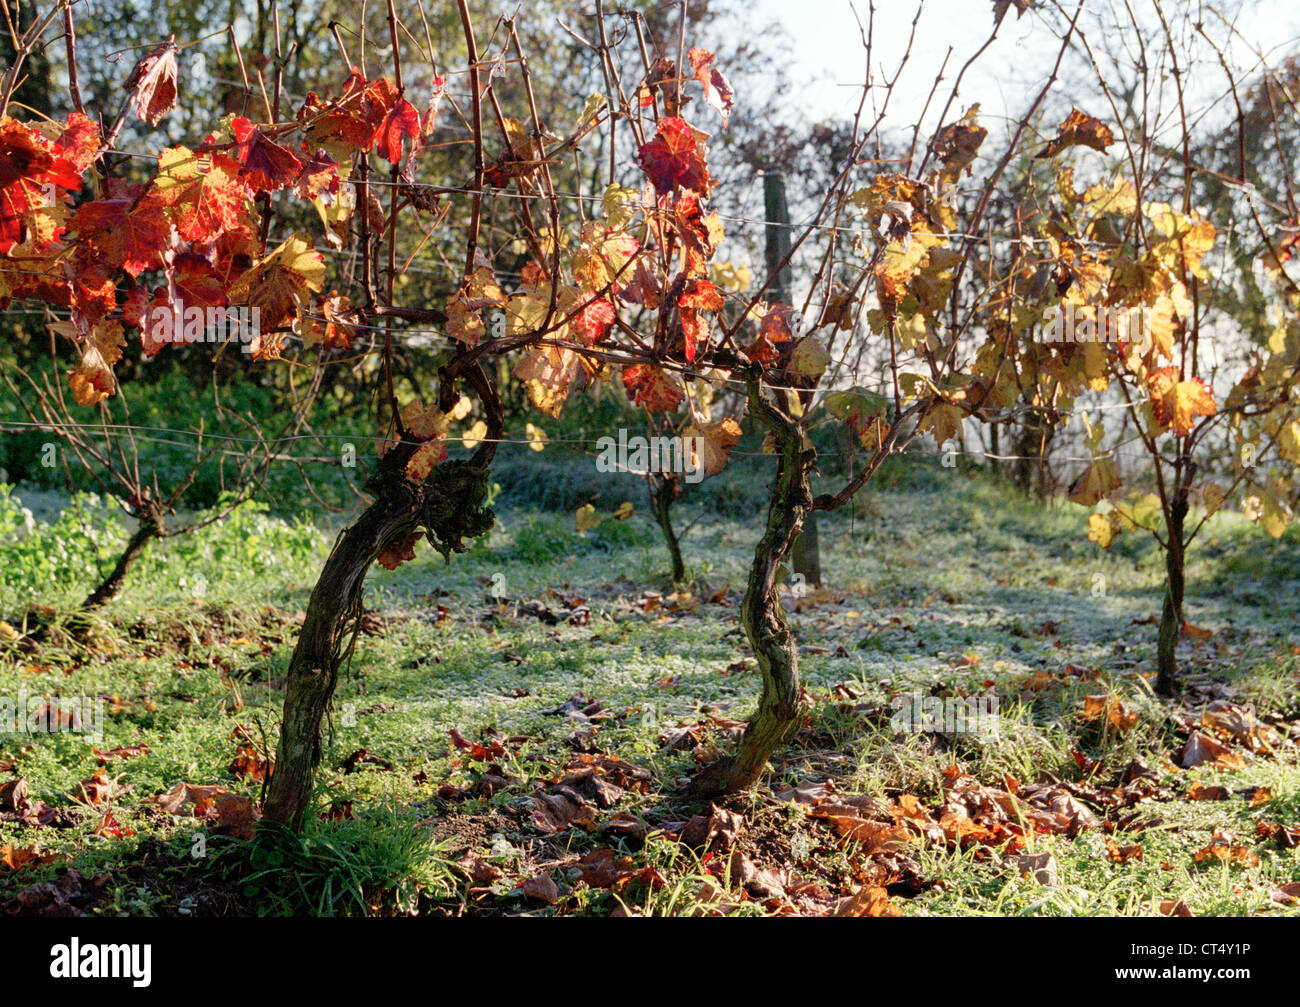 Weinstoecke with autumnal leaves in a garden Stock Photo